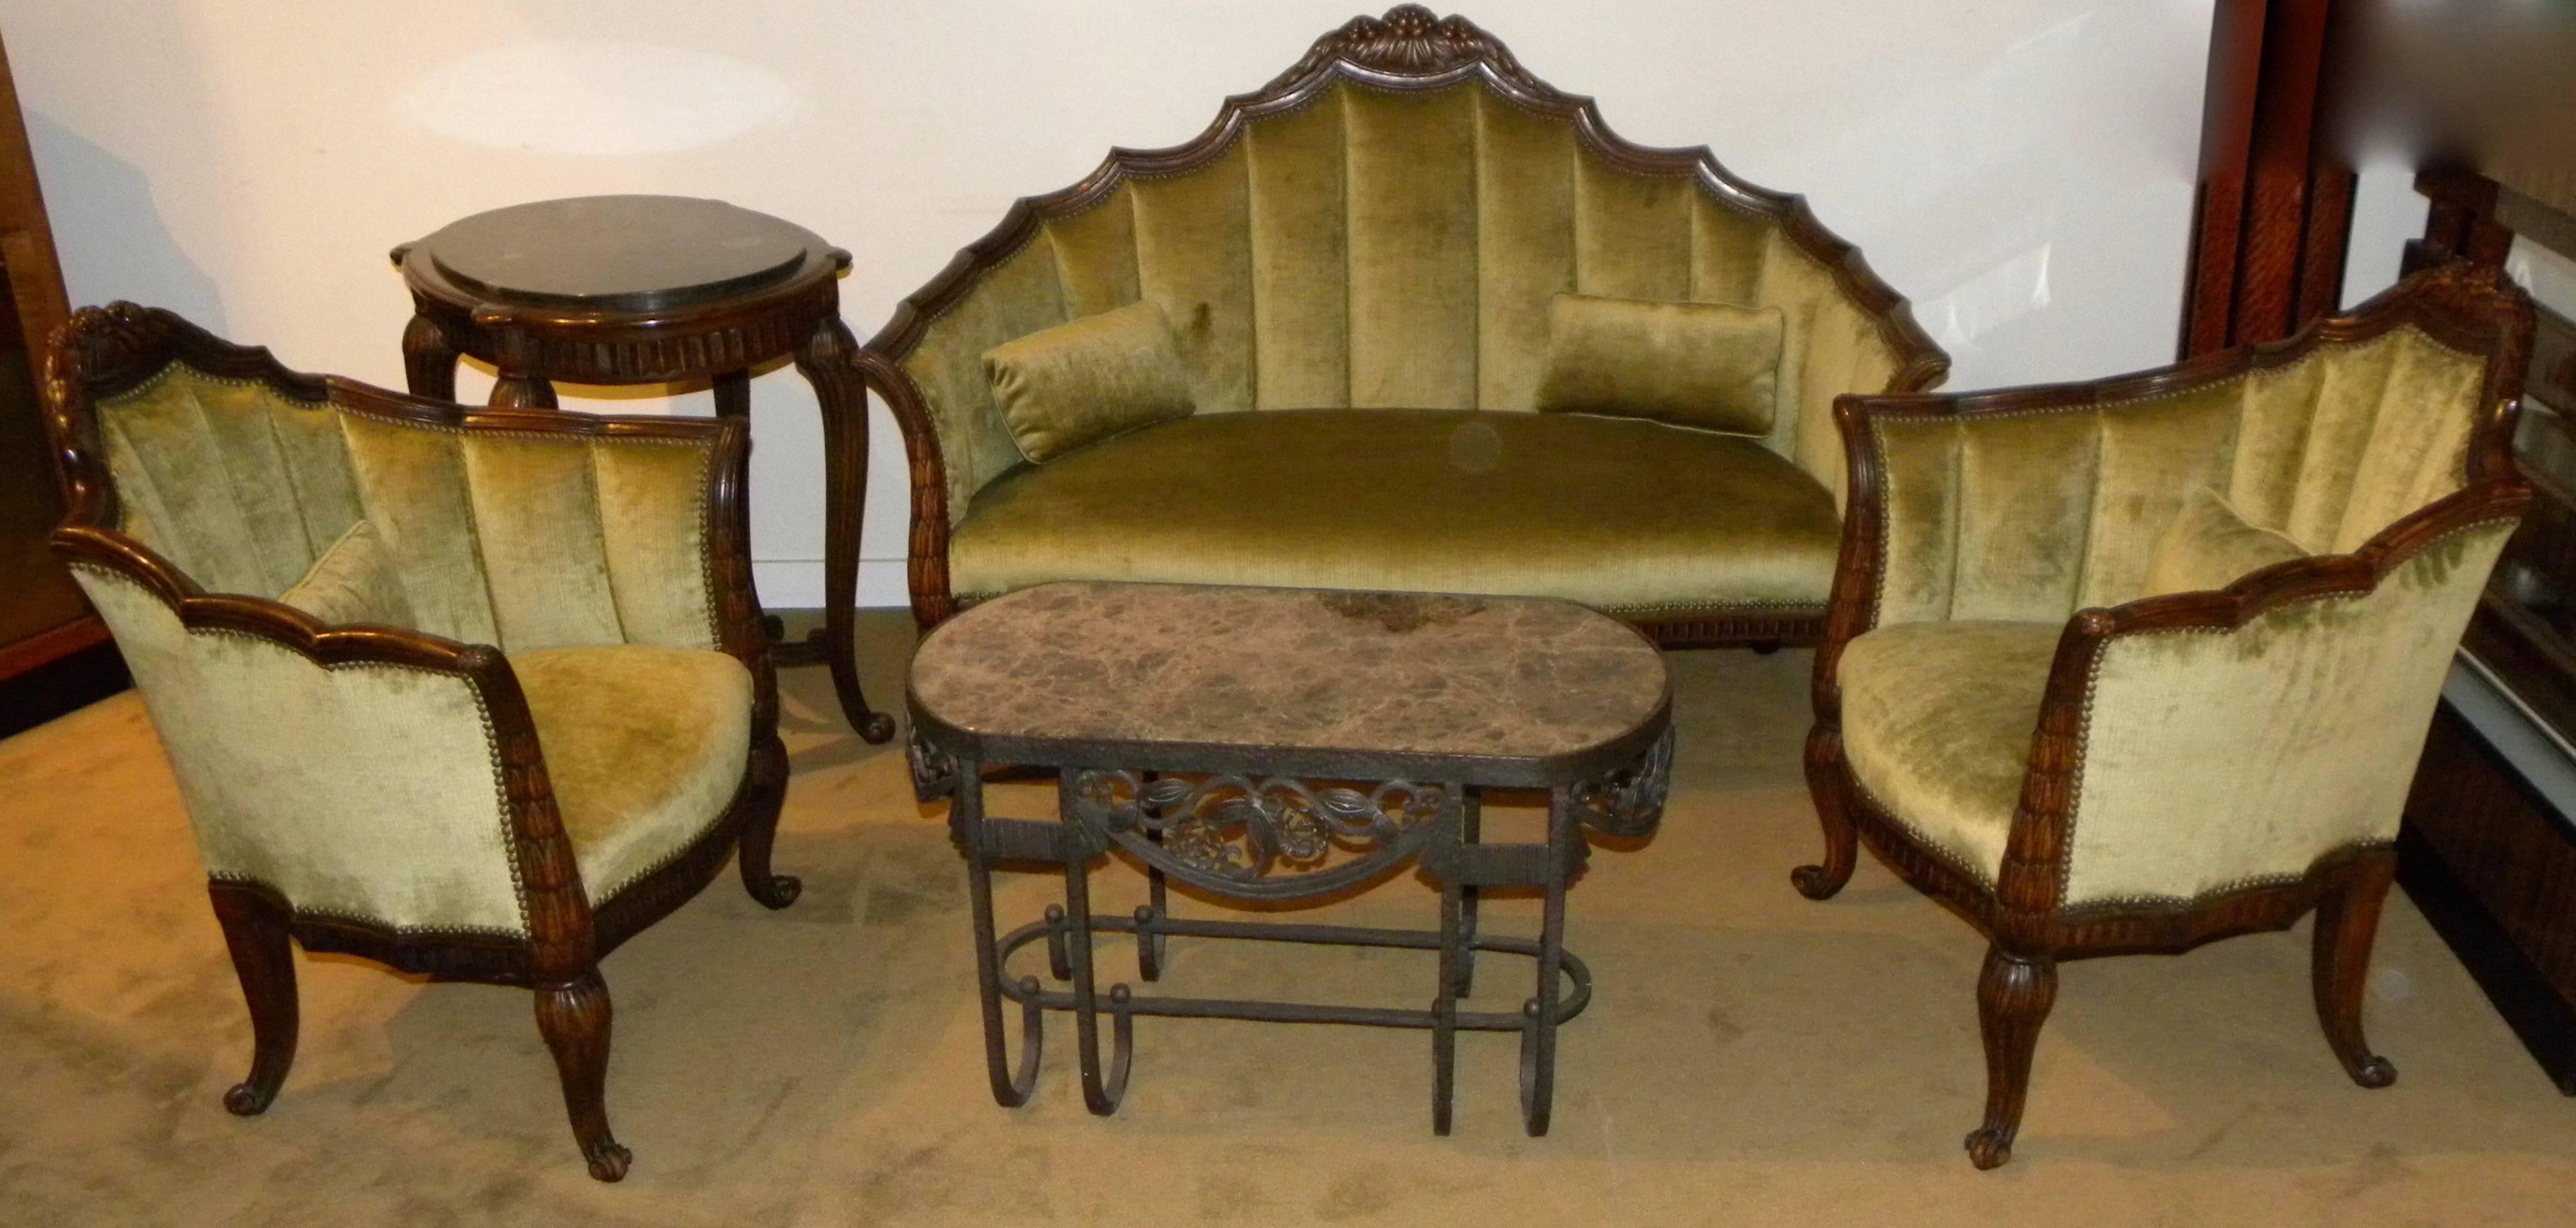 Original French Art Deco settee plus chairs and matching table. This spectacular set with intricate carving throughout the frame represents that ‘old world craftsmanship’ all solid wood. The set was made circa 1920-1924 and represents the period of